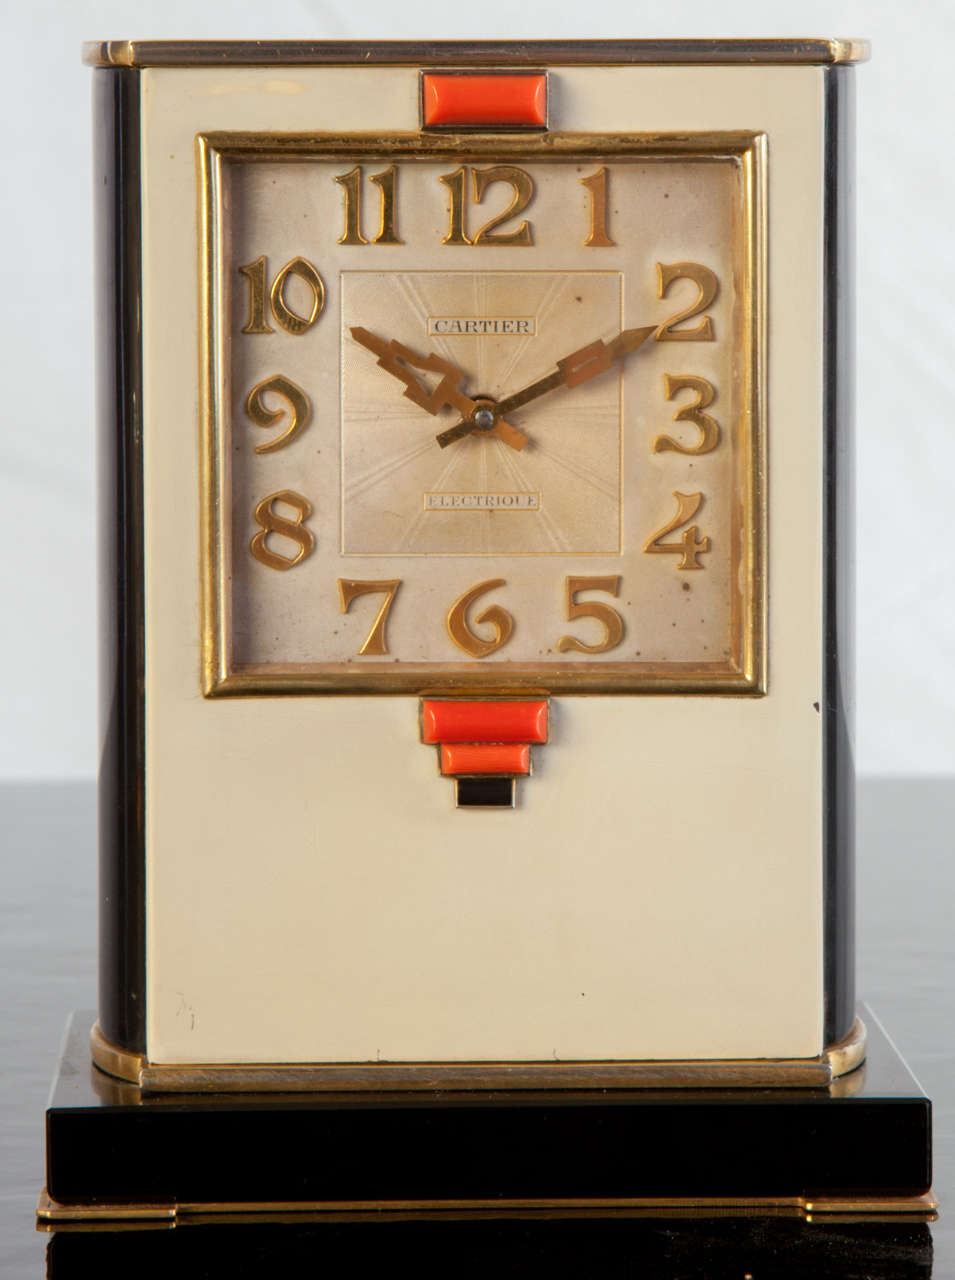 French Cartier Alarm Clock France 1928 with Original Box For Sale